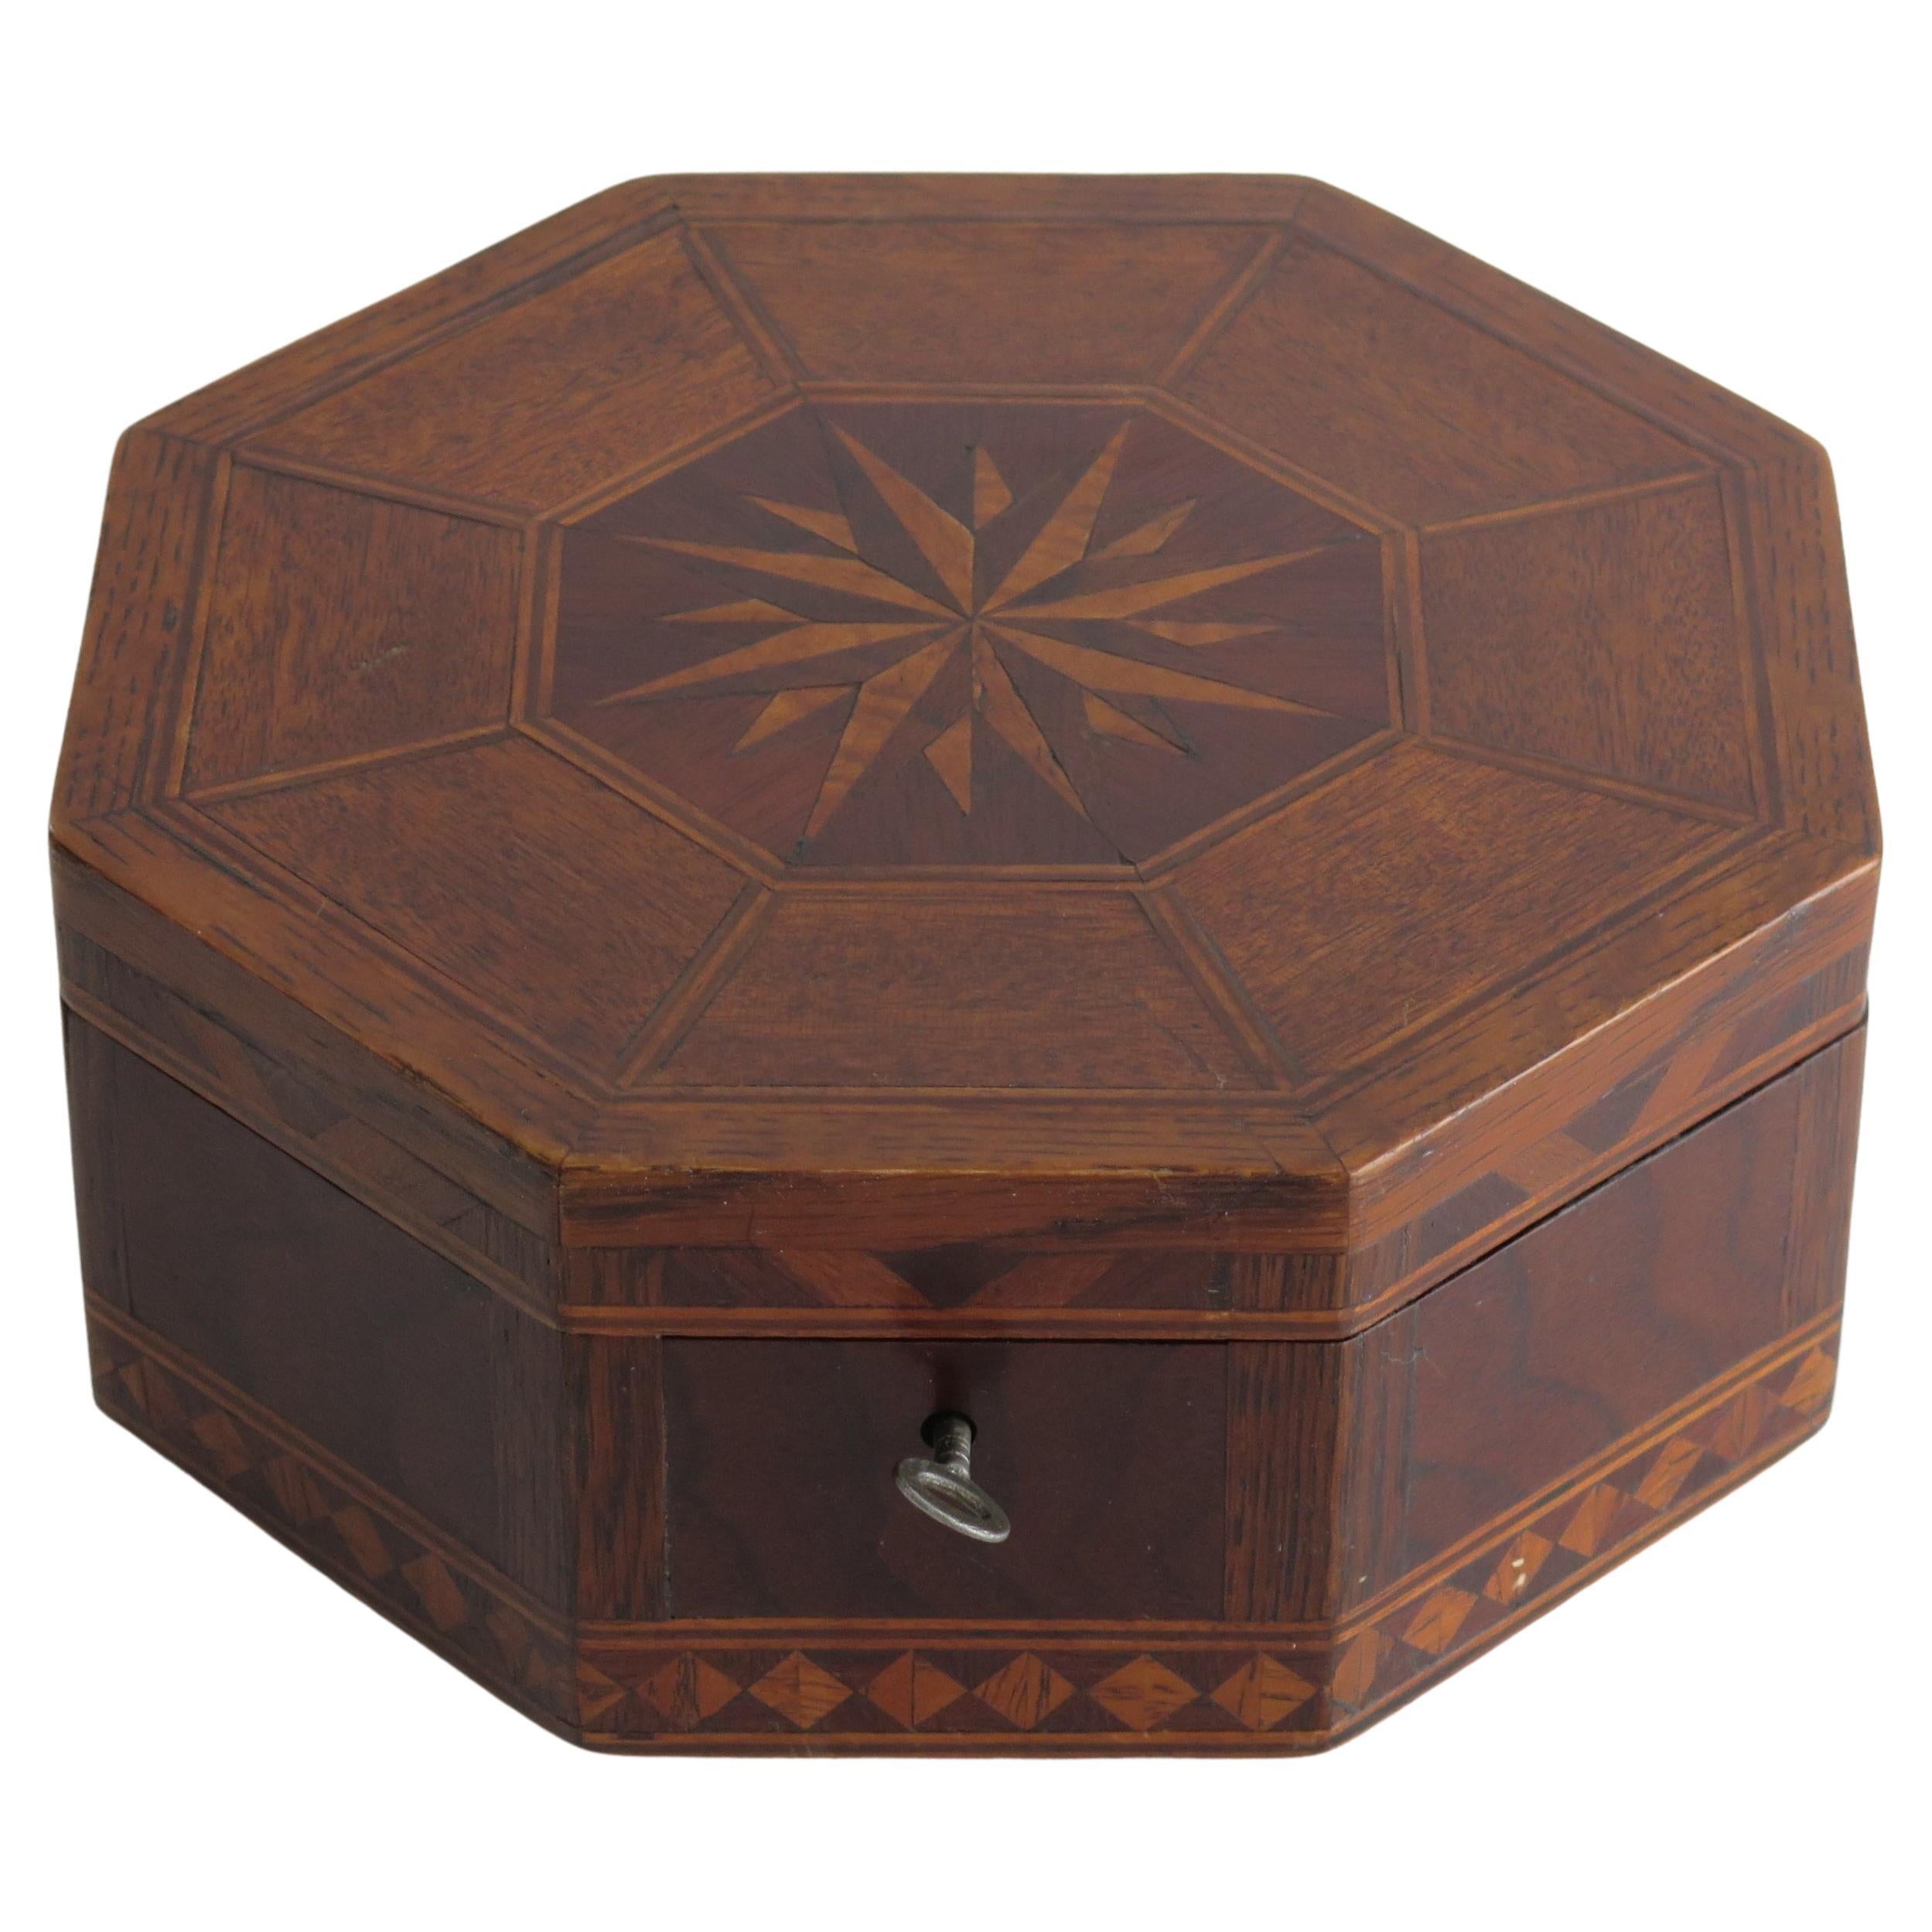 Inlaid Octagonal hardwood Box with Fitted Interior and Key, English Early 19th C